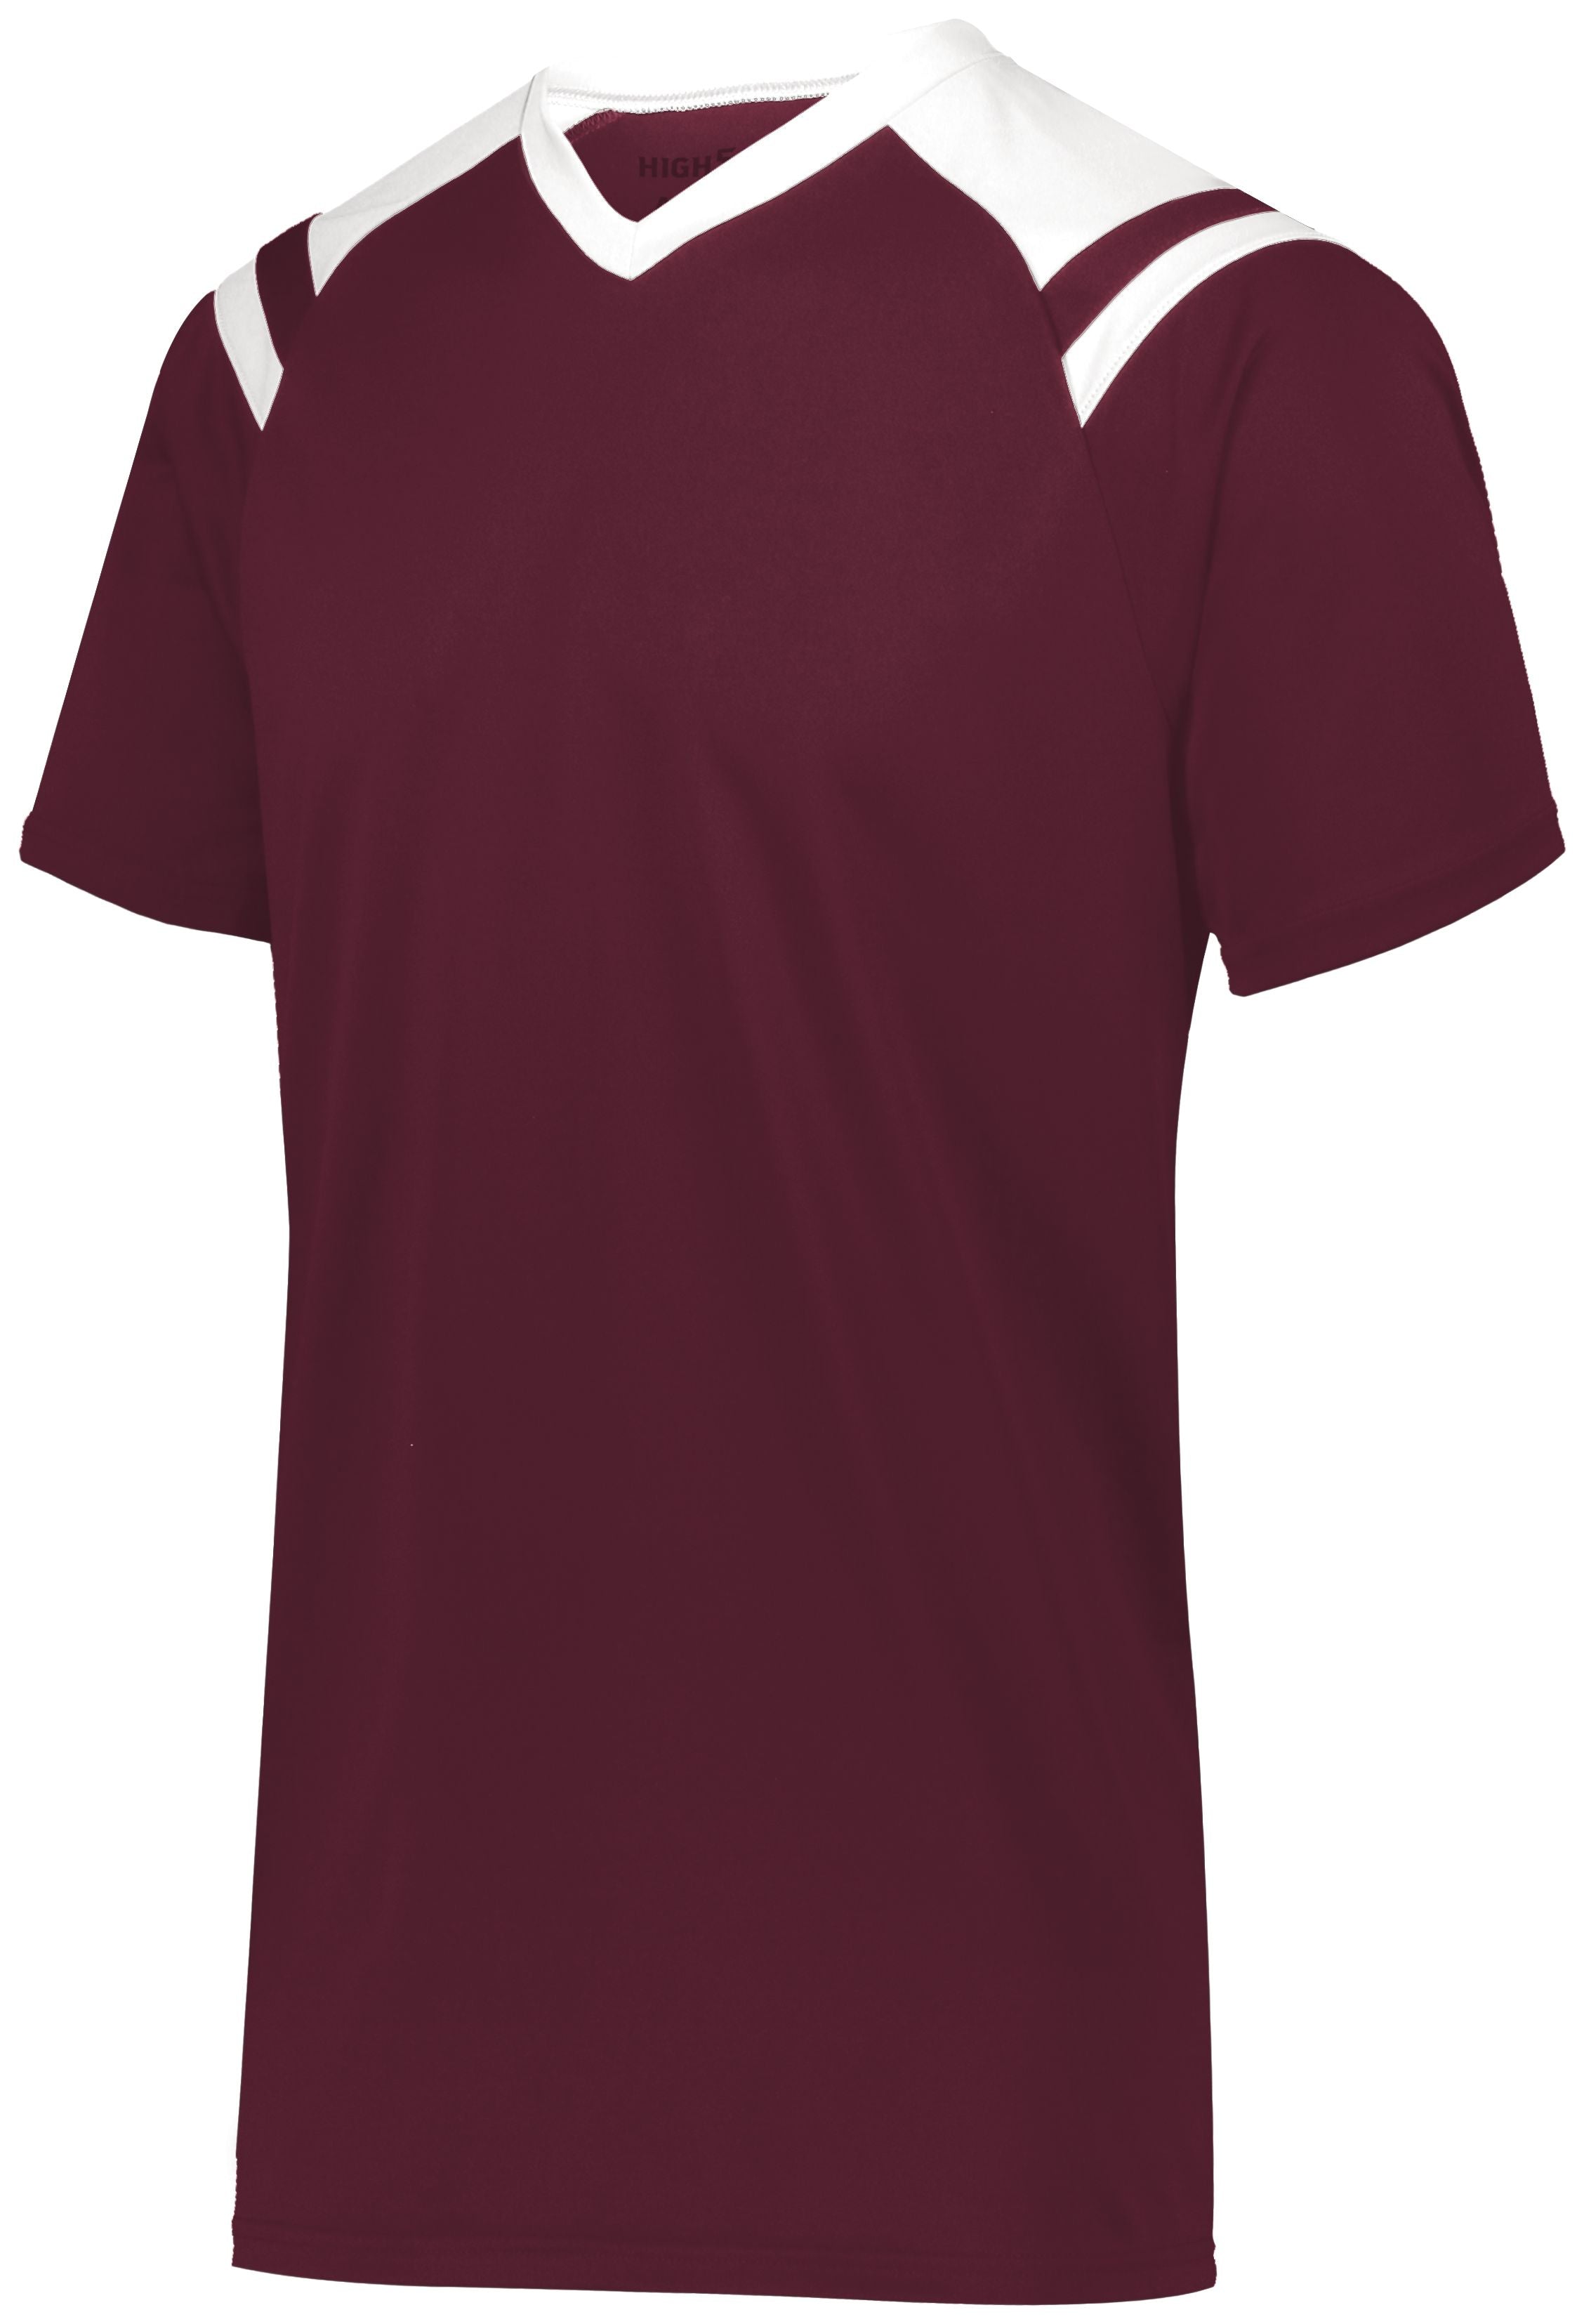 High 5 Sheffield Jersey in Maroon/White  -Part of the Adult, Adult-Jersey, High5-Products, Soccer, Shirts, All-Sports-1, Sheffield-Soccer-Jerseys product lines at KanaleyCreations.com